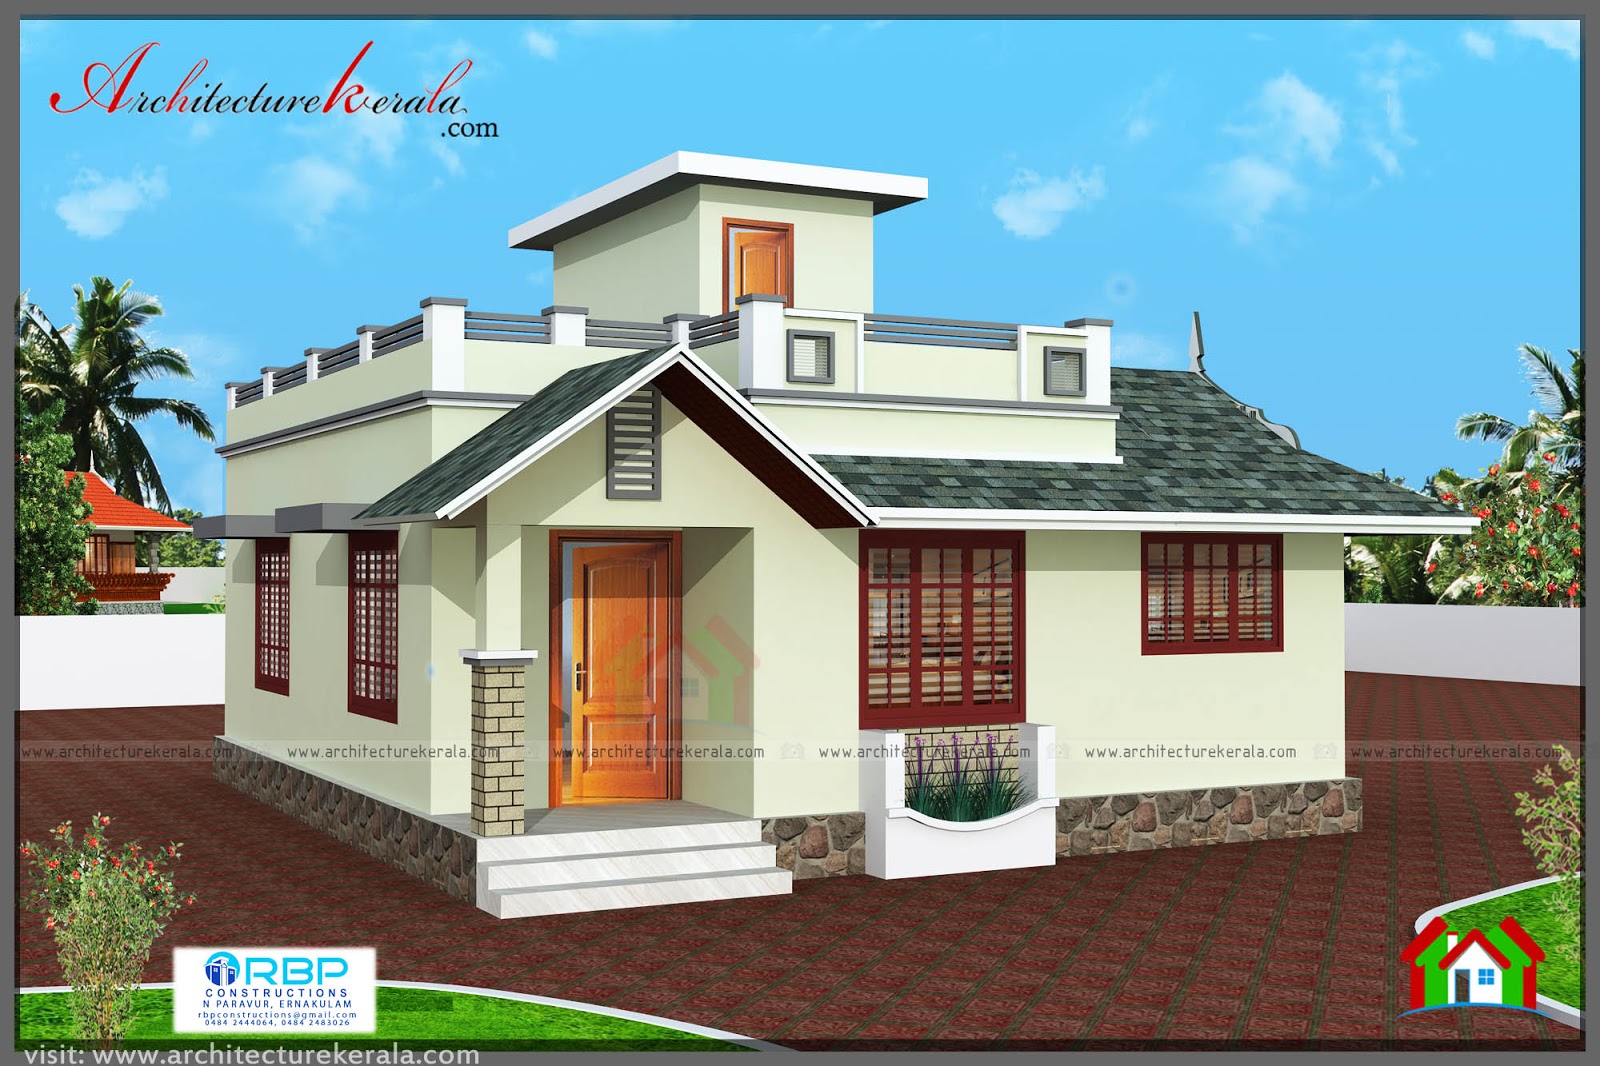 2 BEDROOM HOUSE PLAN AND ELEVATION IN 700 SQFT 